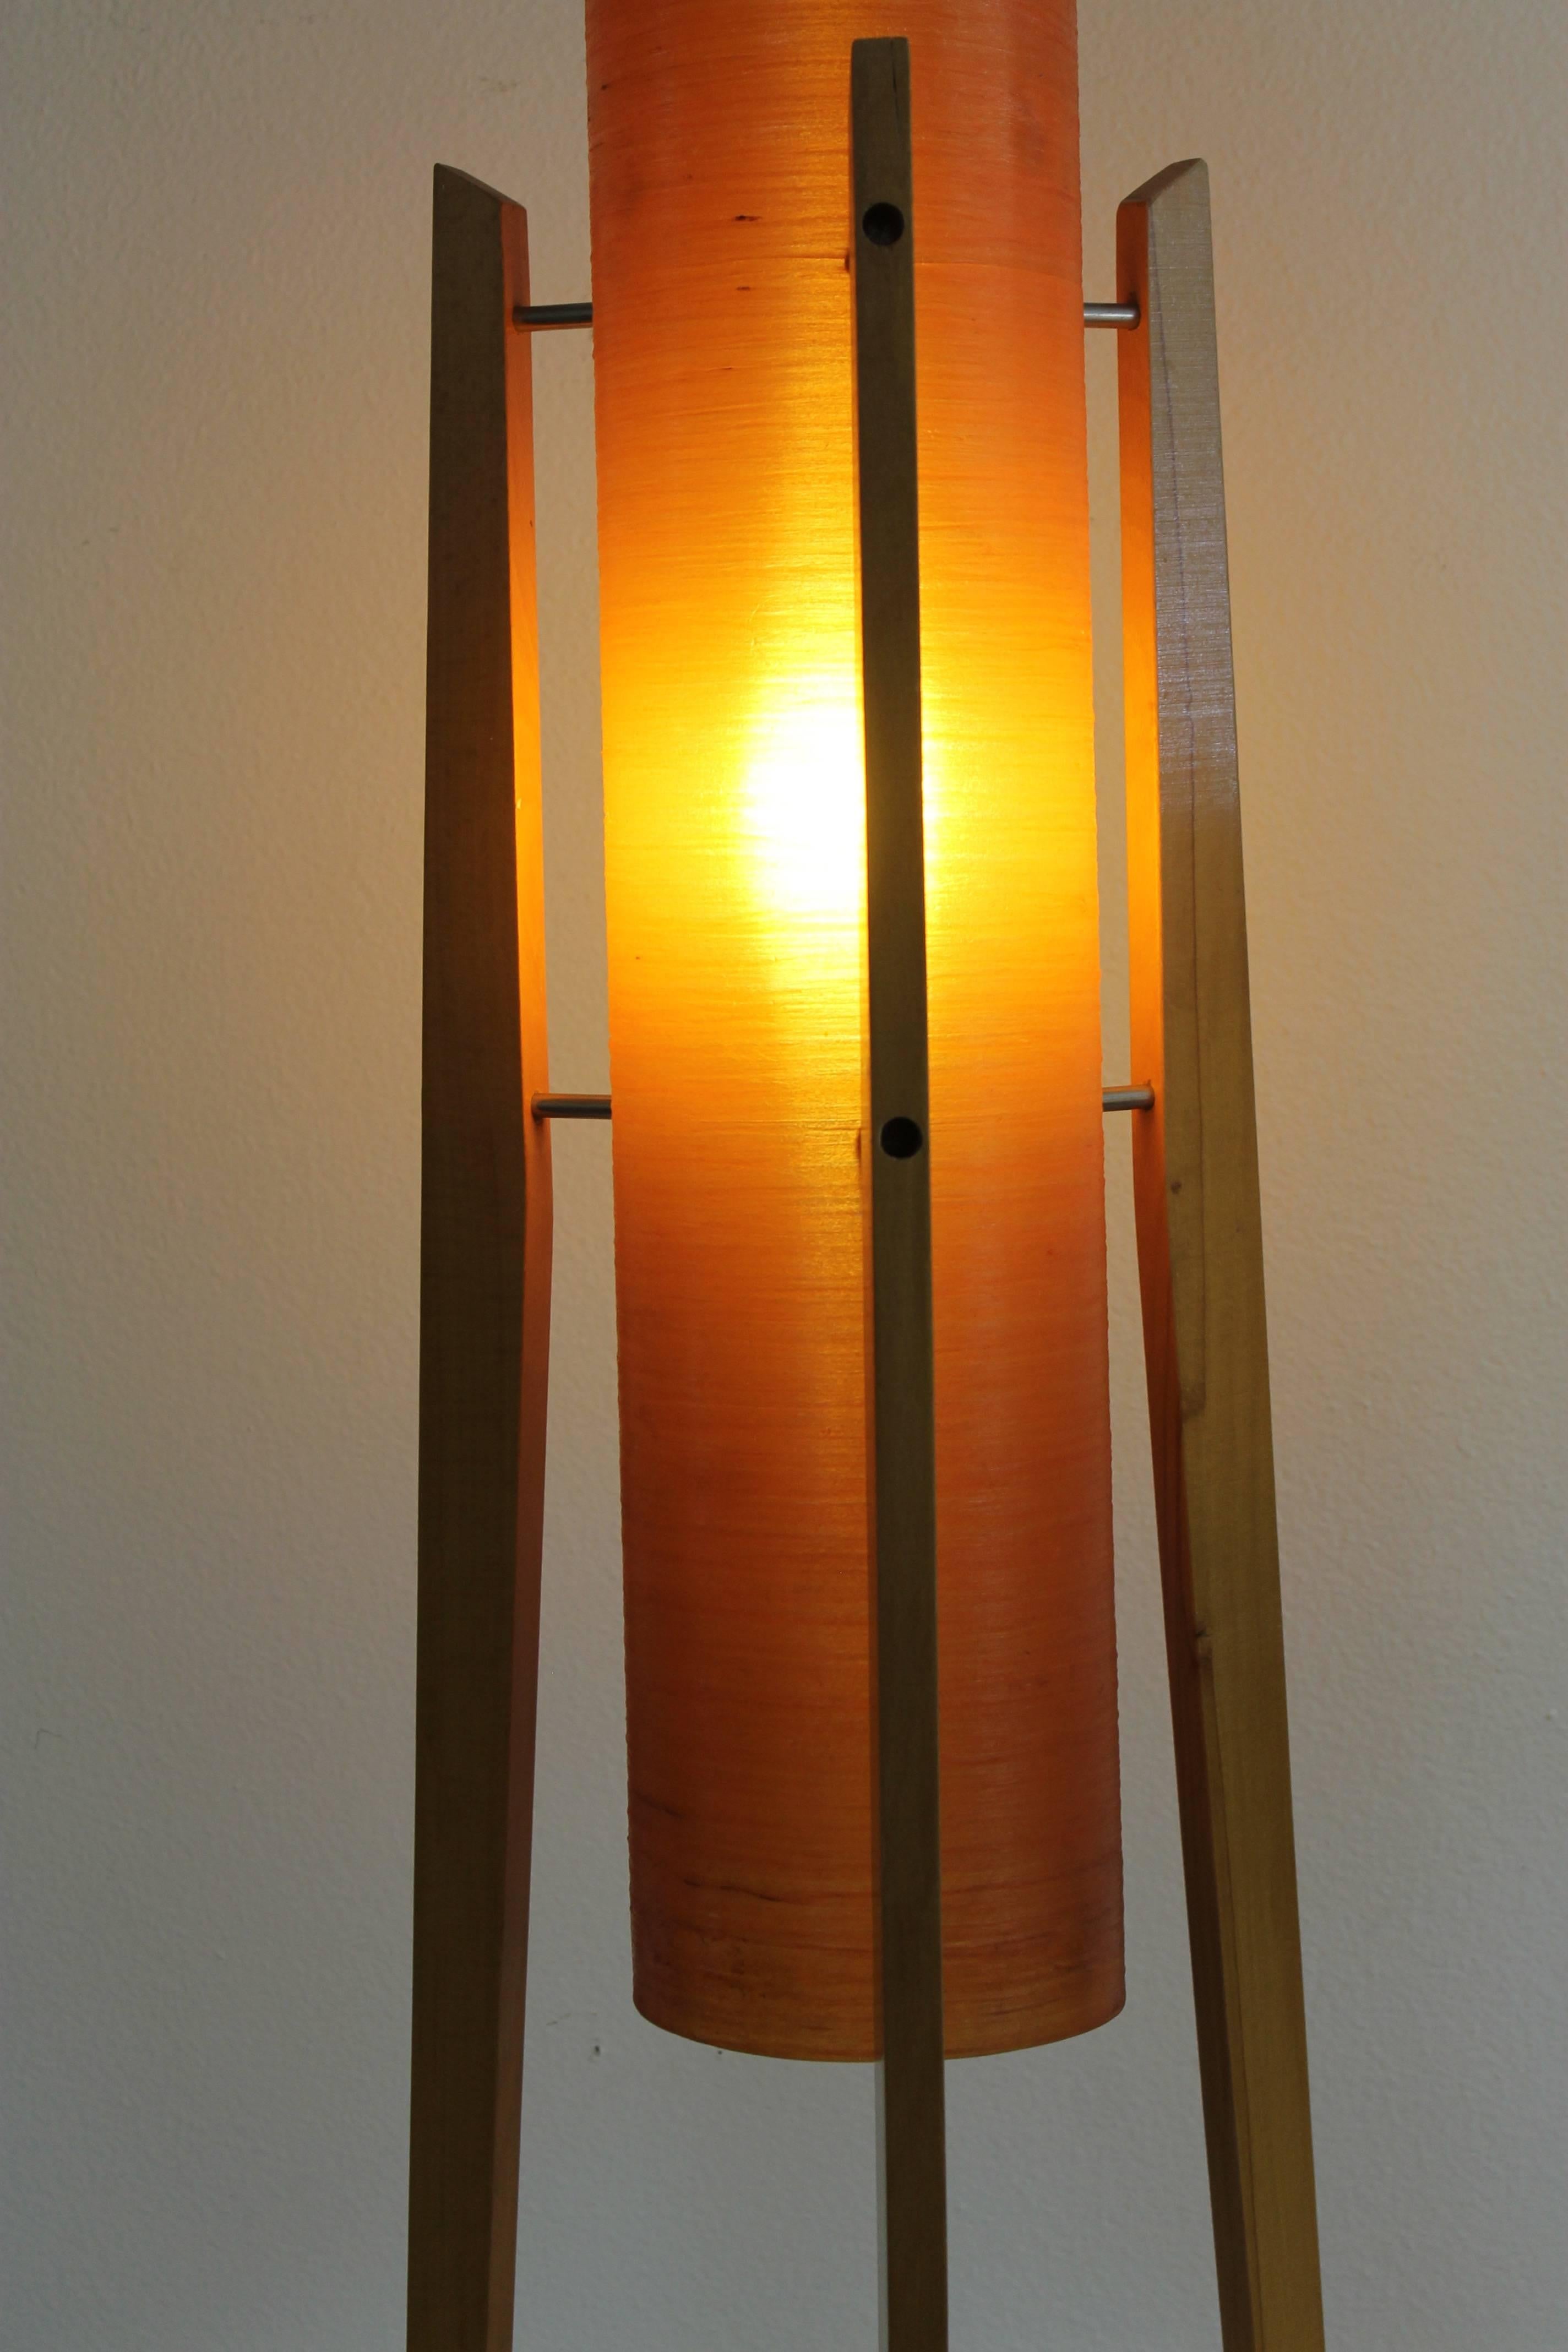 Found in Czechoslovakia, this lamp features a cast resin cylinder in muted orange supported by three tapered hardwood legs. Beautiful orange glow is similar to that of spun fiberglass lamps of the same period. The lamp measures 46.25